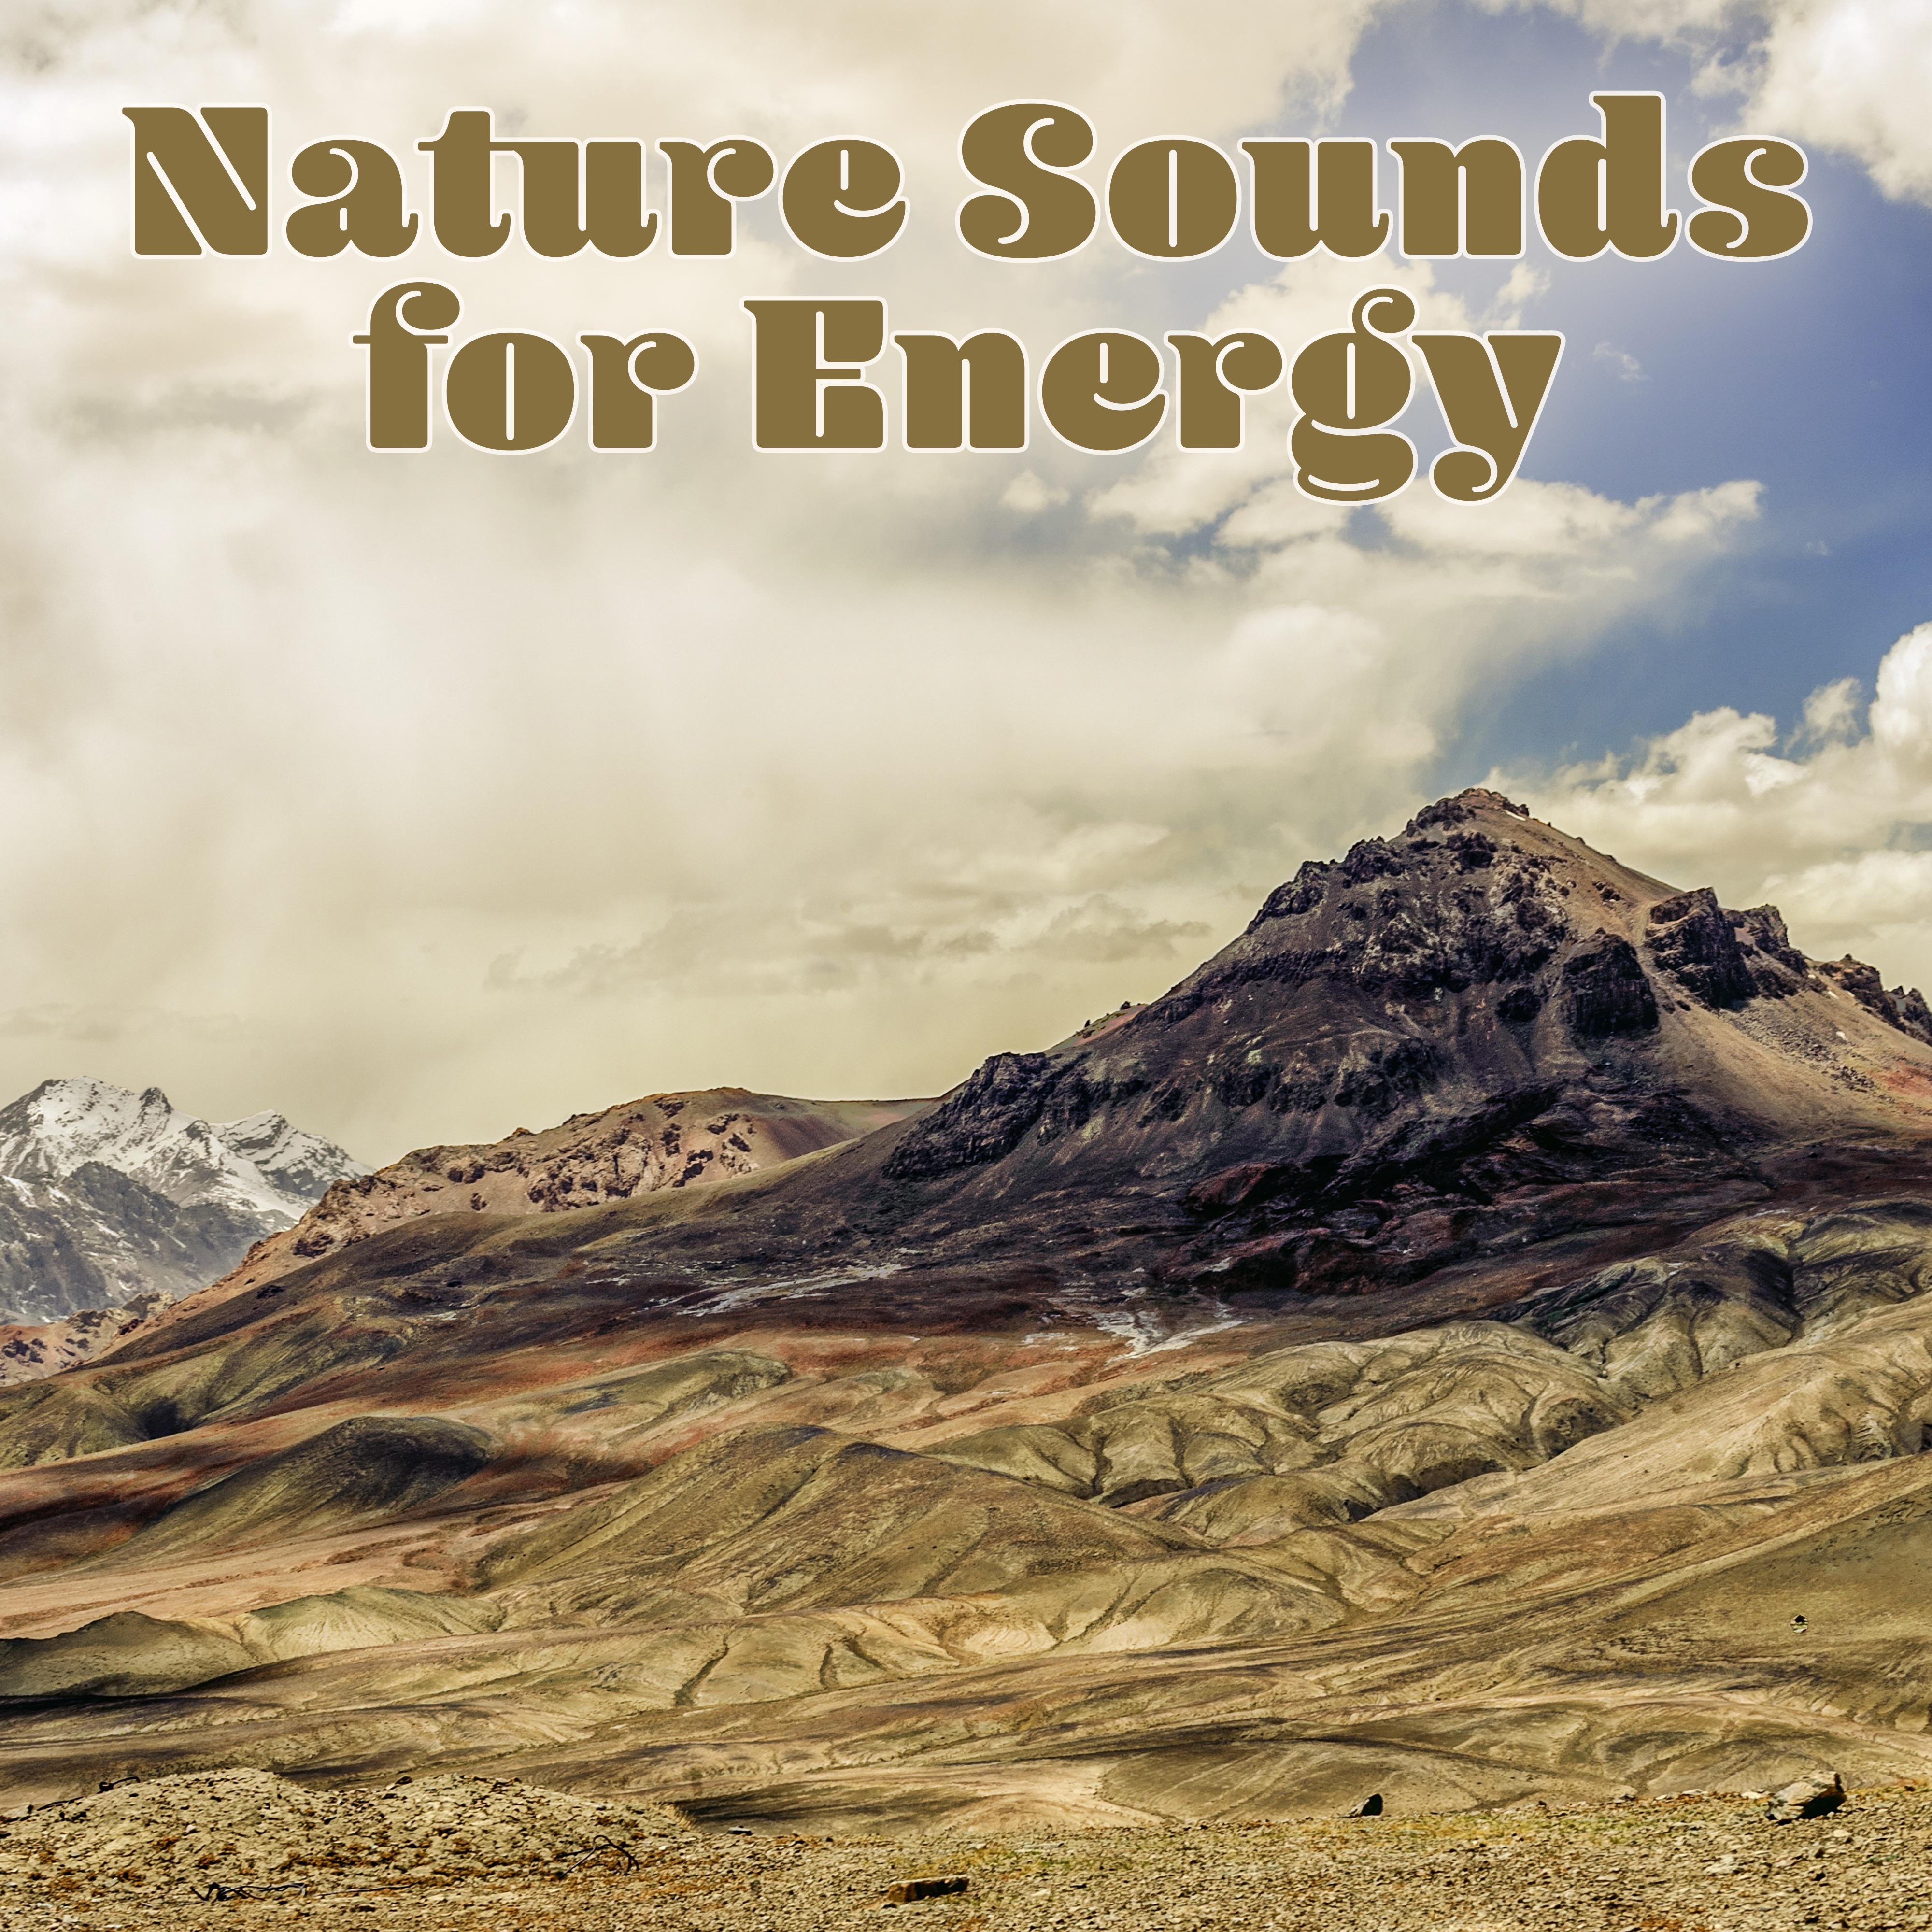 Nature Sounds for Energy Gathering  Soft New Age Music, Nature Music, Meditation Sounds, Inner Silence